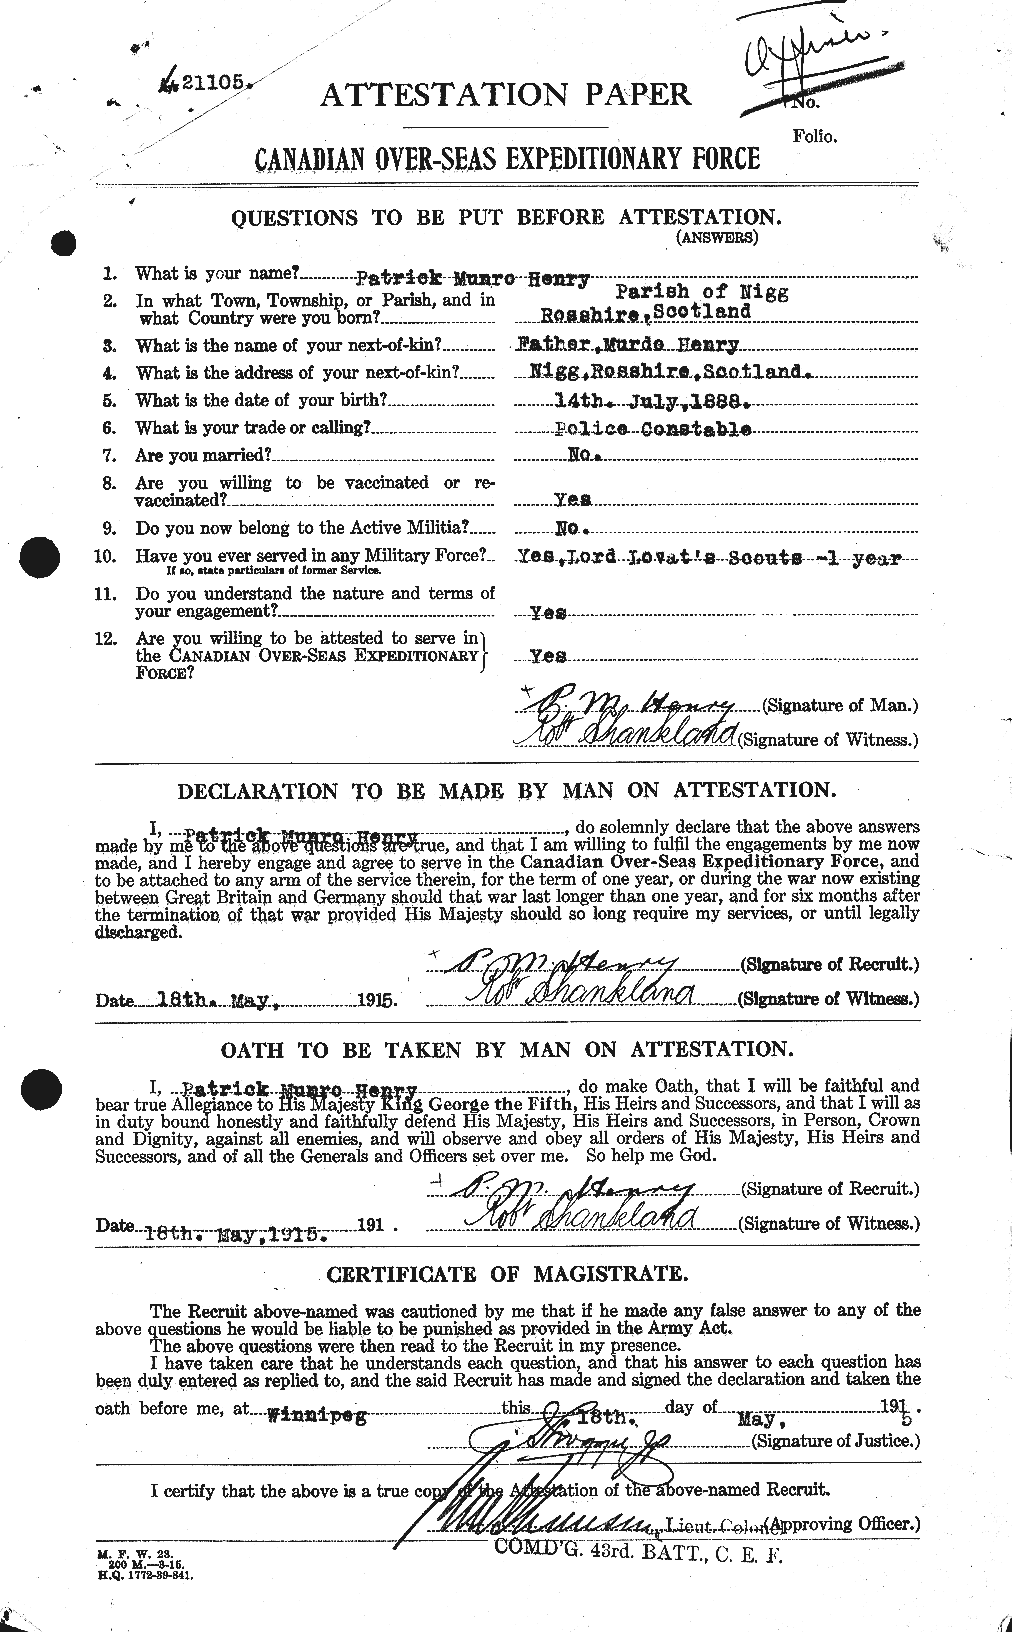 Personnel Records of the First World War - CEF 387679a